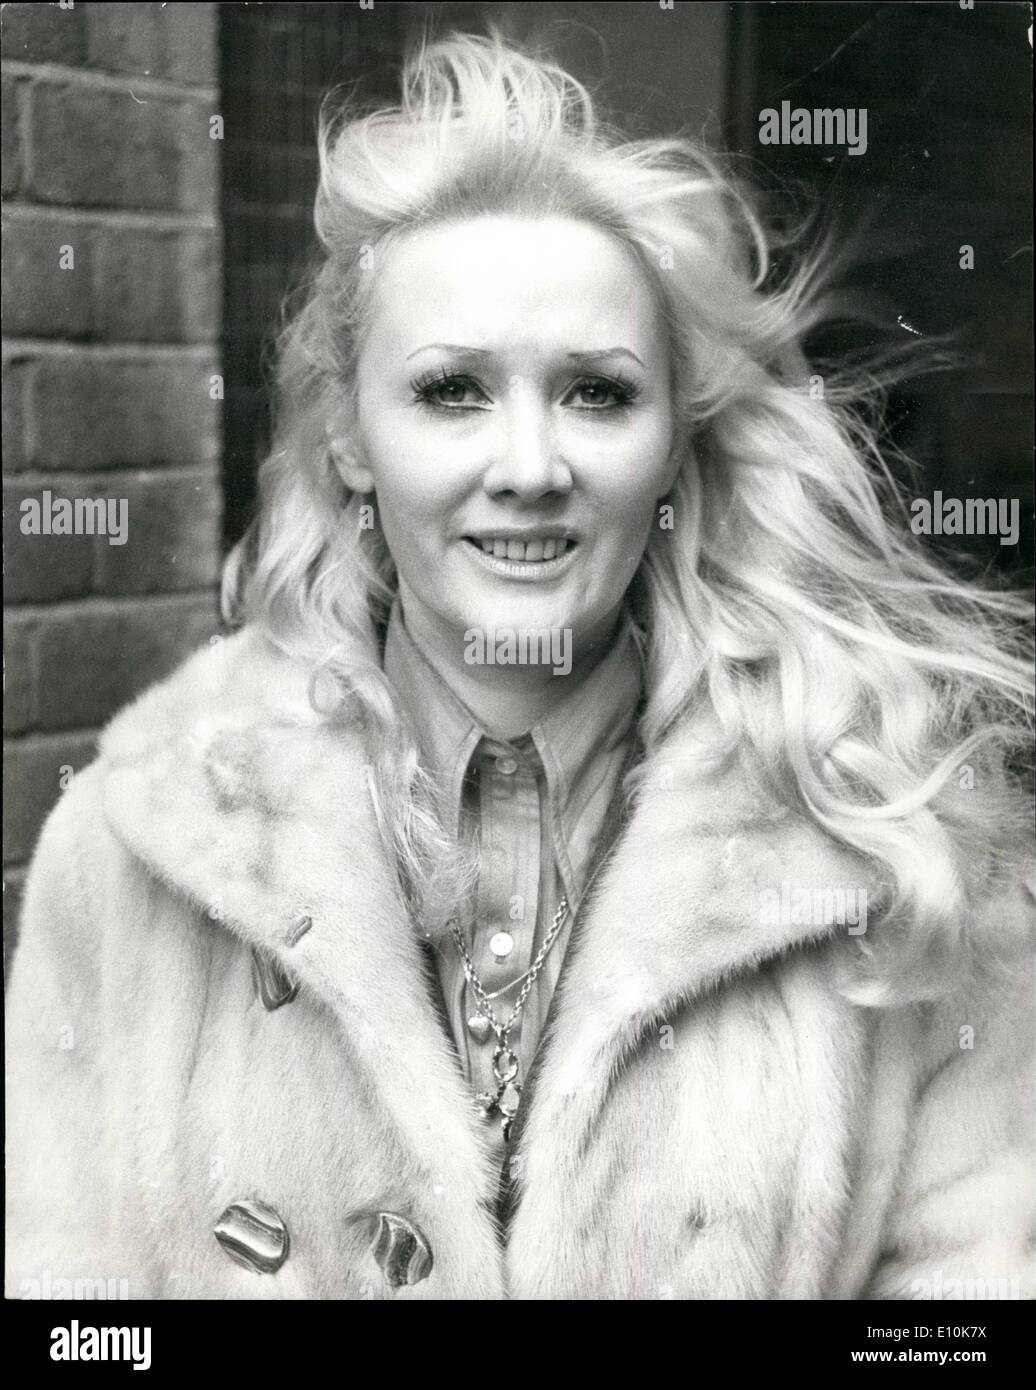 May 05, 1973 - ''Bribery at BBC'' - 15 arrested: The famous singer Dorothy Squires was arrested today in connection with allegations that BBC producers were bribed broadcast pop records. Warrants were issued for the detention of 14 other people, including Janie Jones, West End hostess and former model. Photo Shows West End hostess and former model Janie Jones. Stock Photo